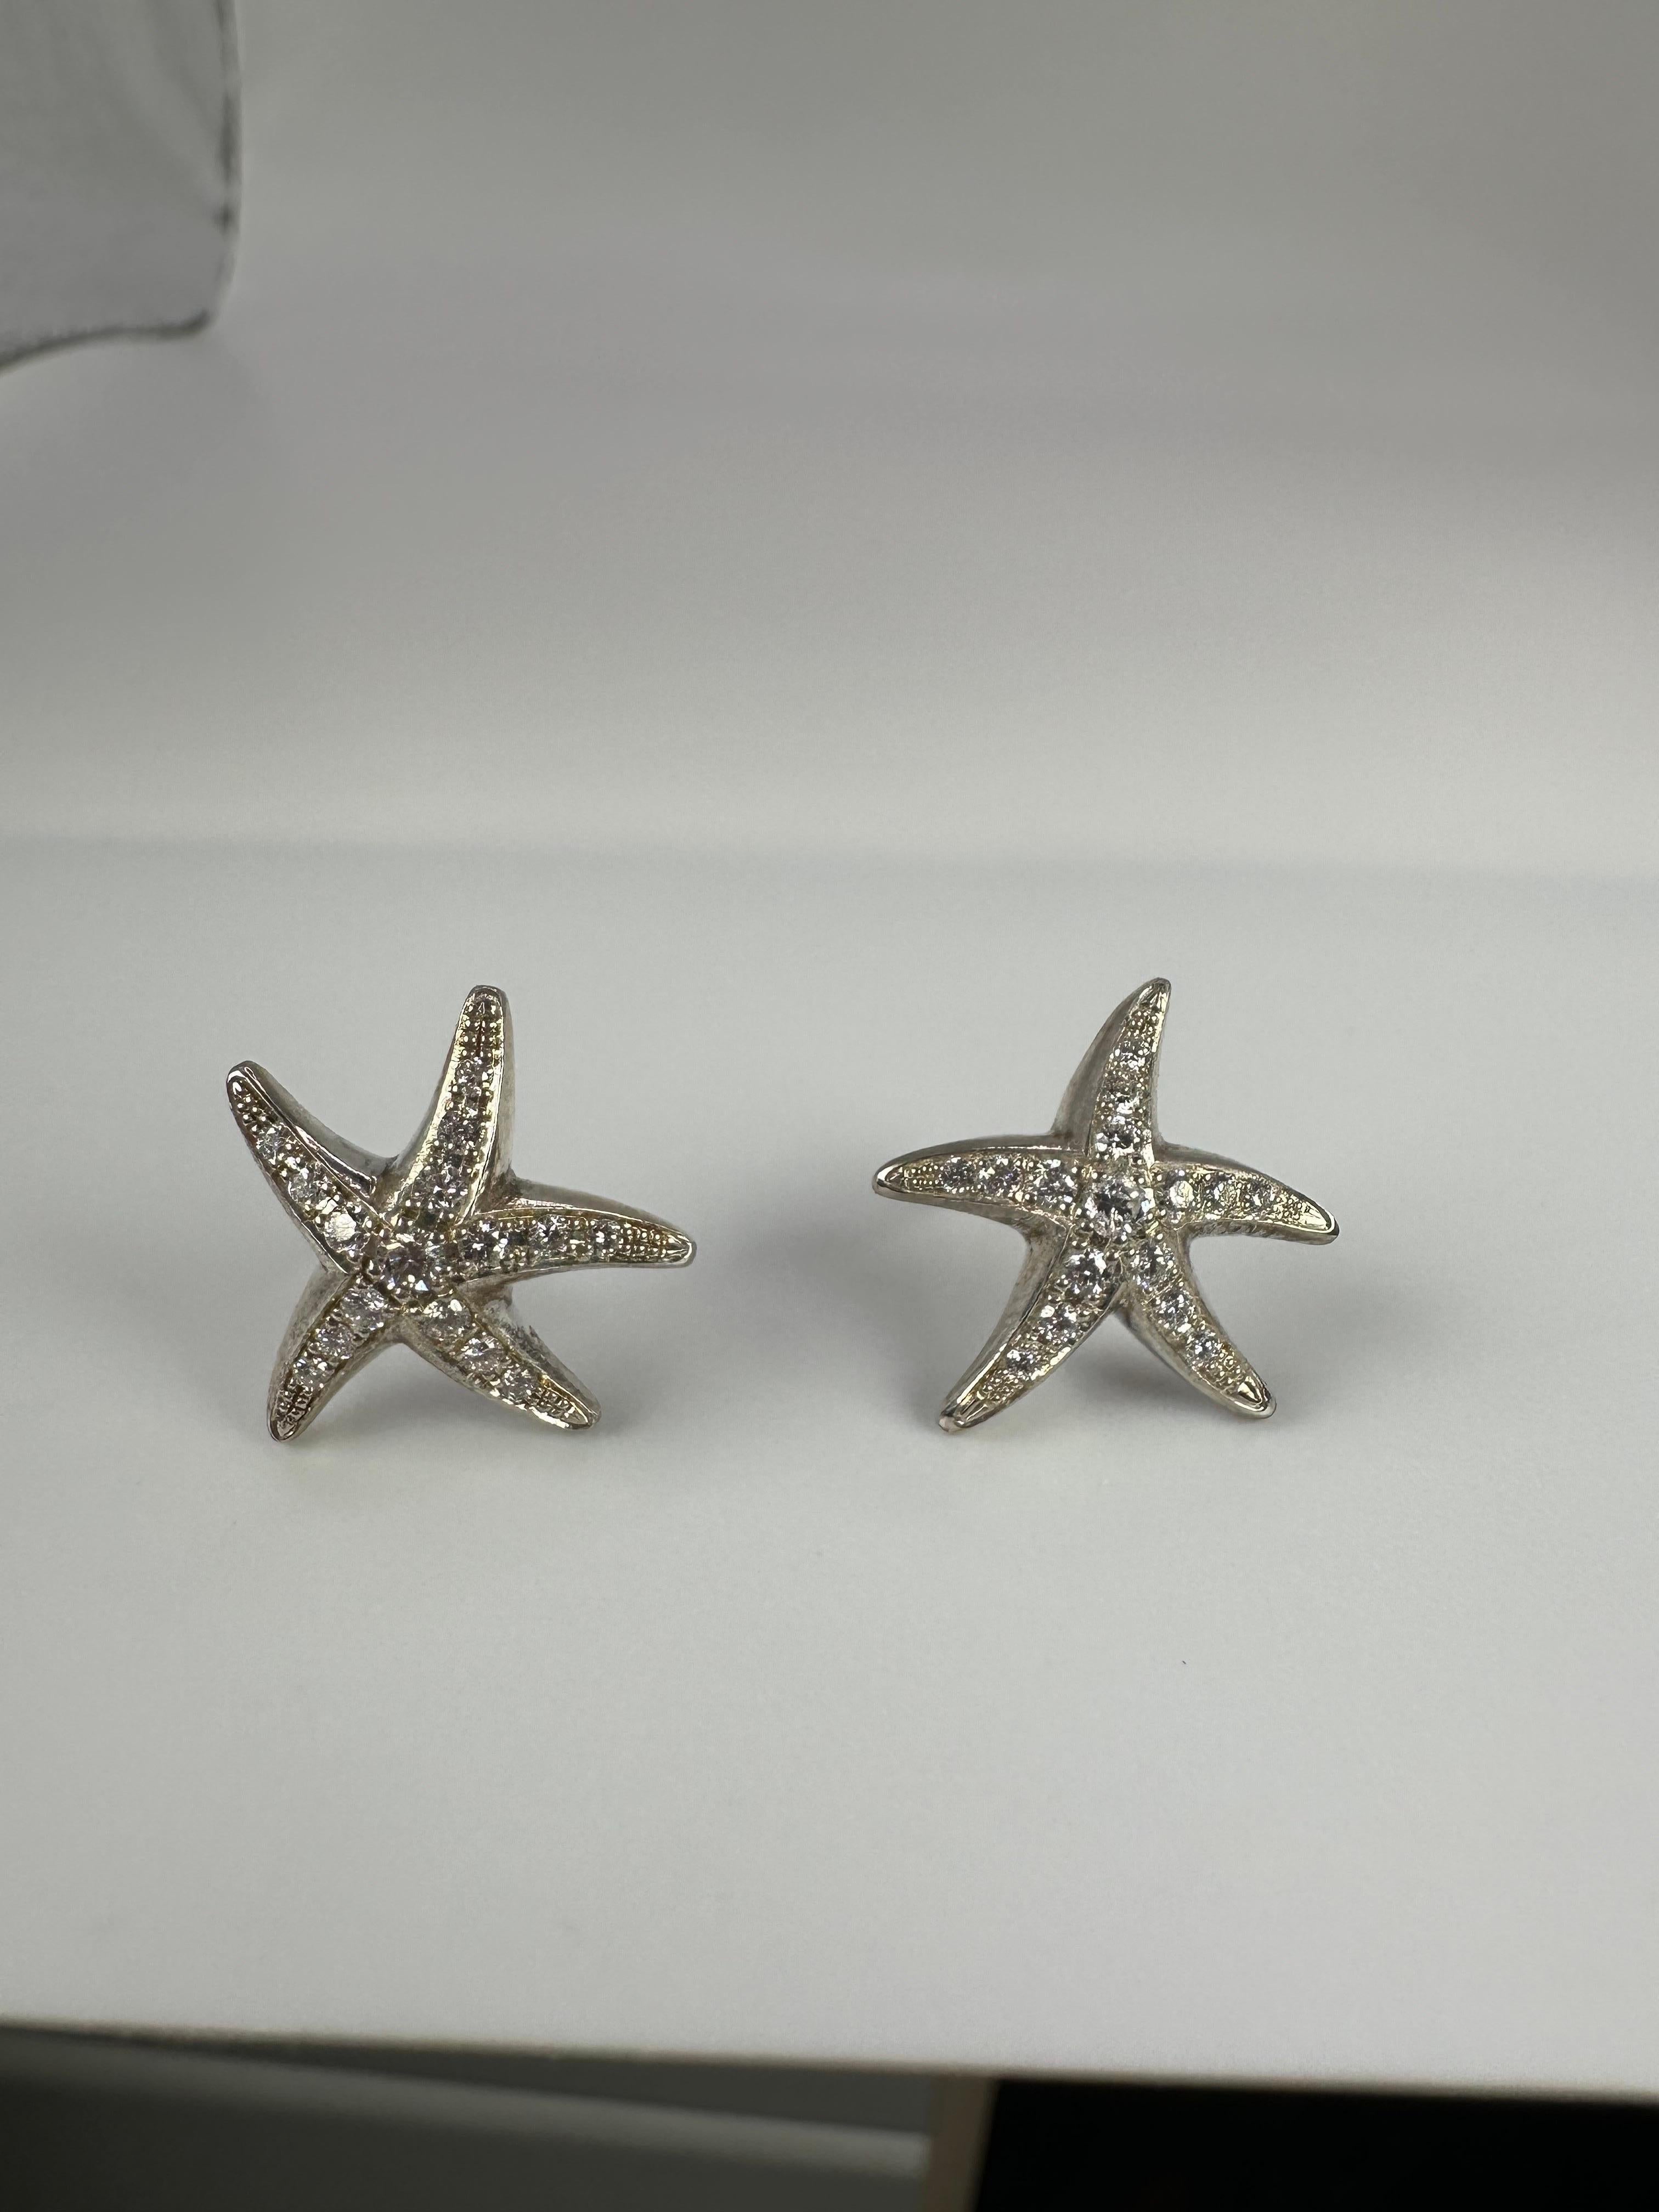 Cute starfish earrings in 14Kt white gold with 0.30ct of diamonds. Stud earrings style!

GOLD: 14KT gold
NATURAL DIAMOND(S)
Clarity/Color: VS/G
Carat:0.30ct

WHAT YOU GET AT STAMPAR JEWELERS:
Stampar Jewelers, located in the heart of Jupiter,